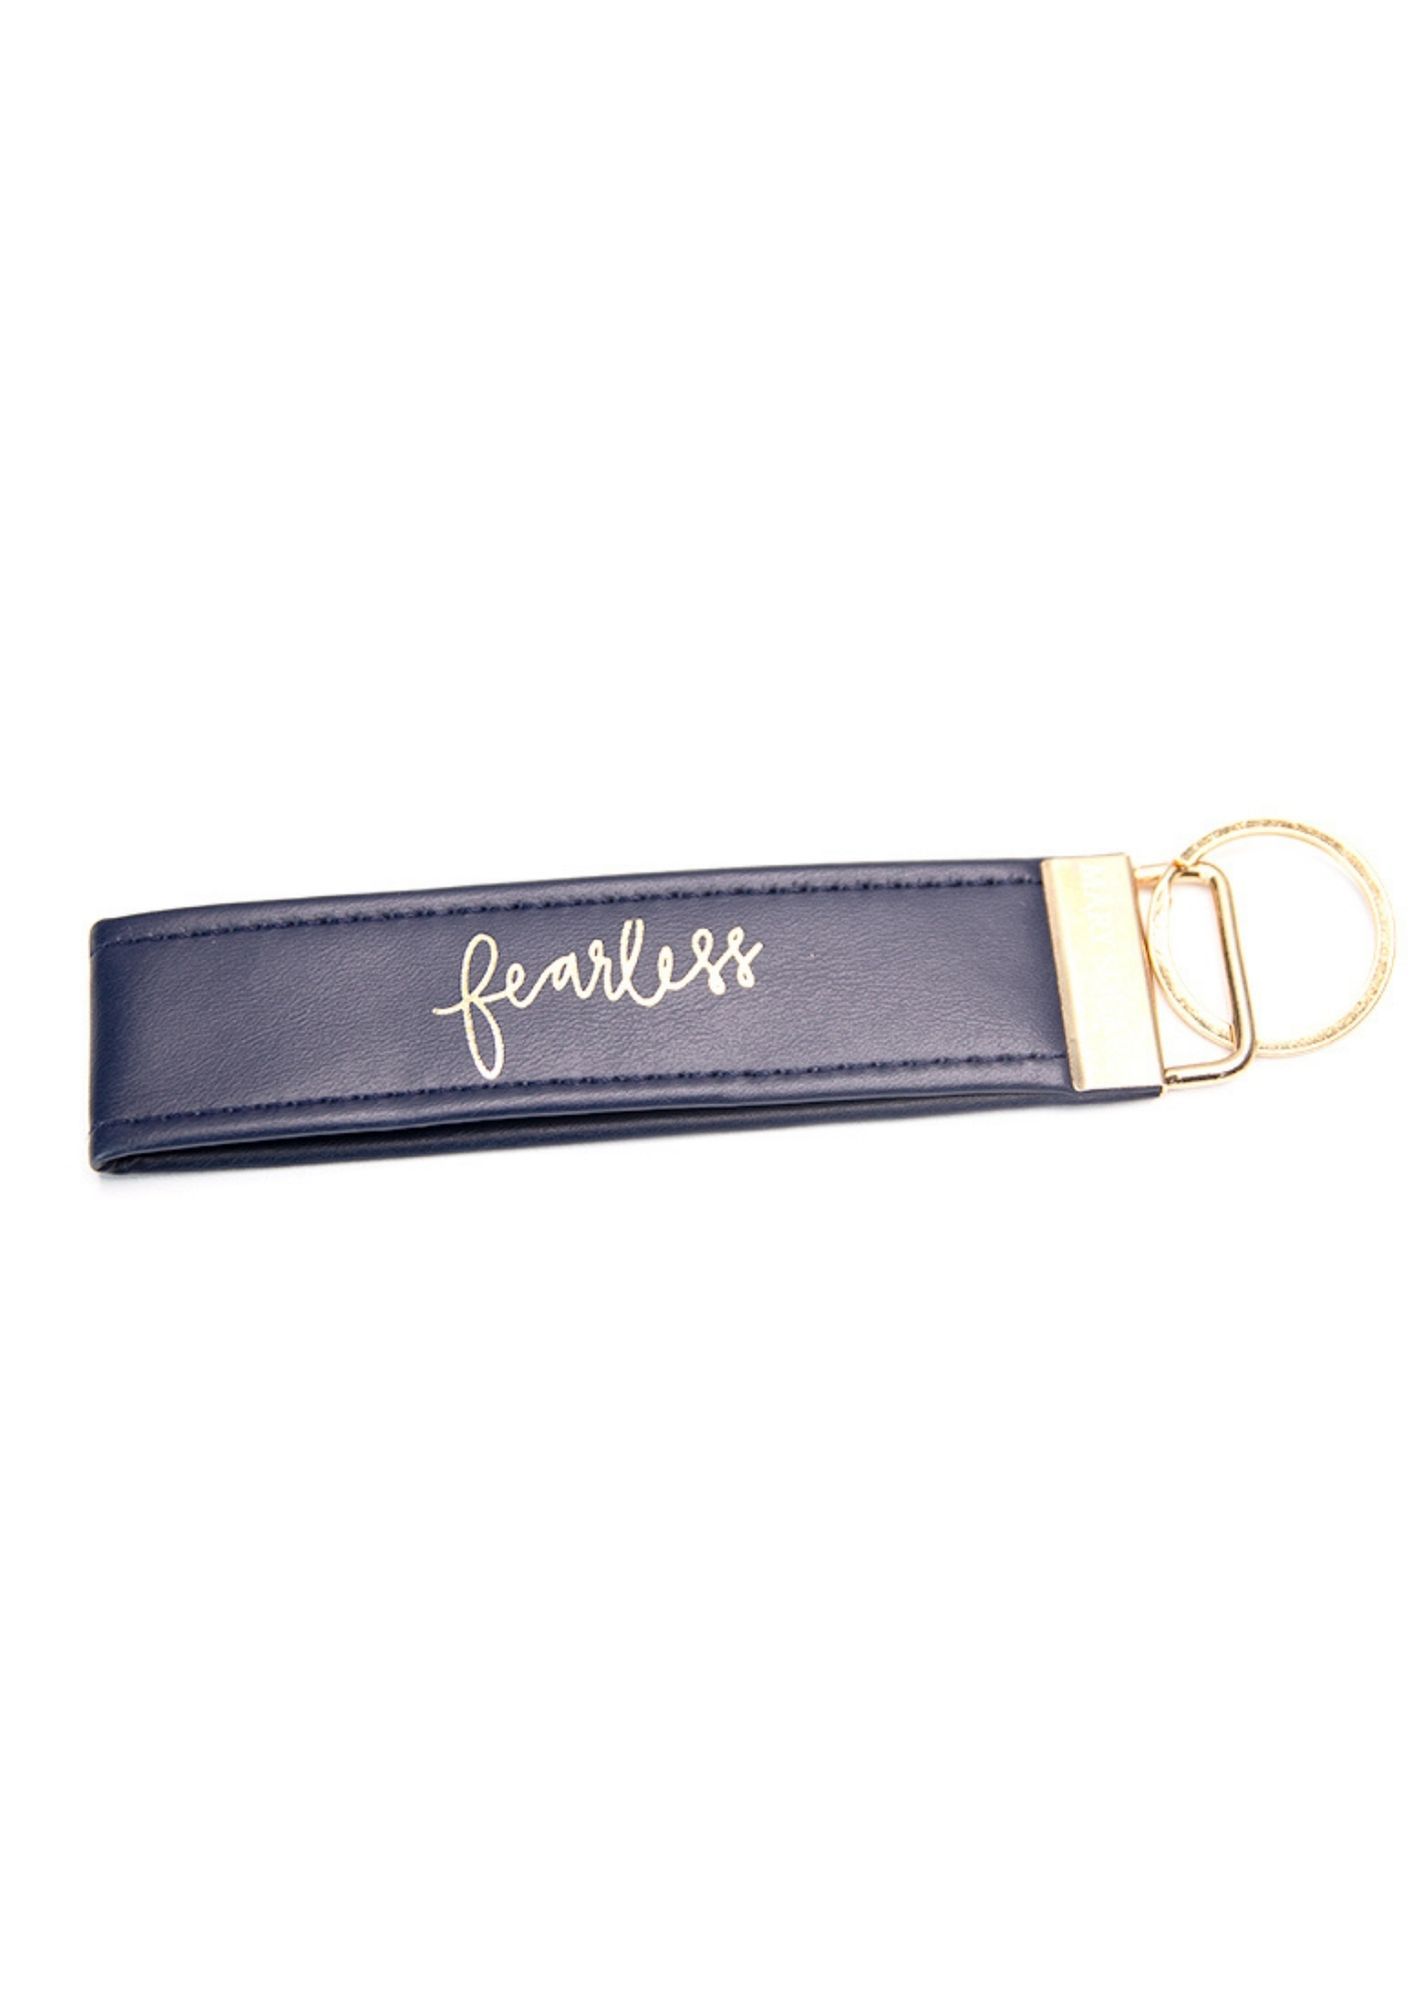 Inspirational Faux Leather Key Fob Accessories Mary Square Fearless